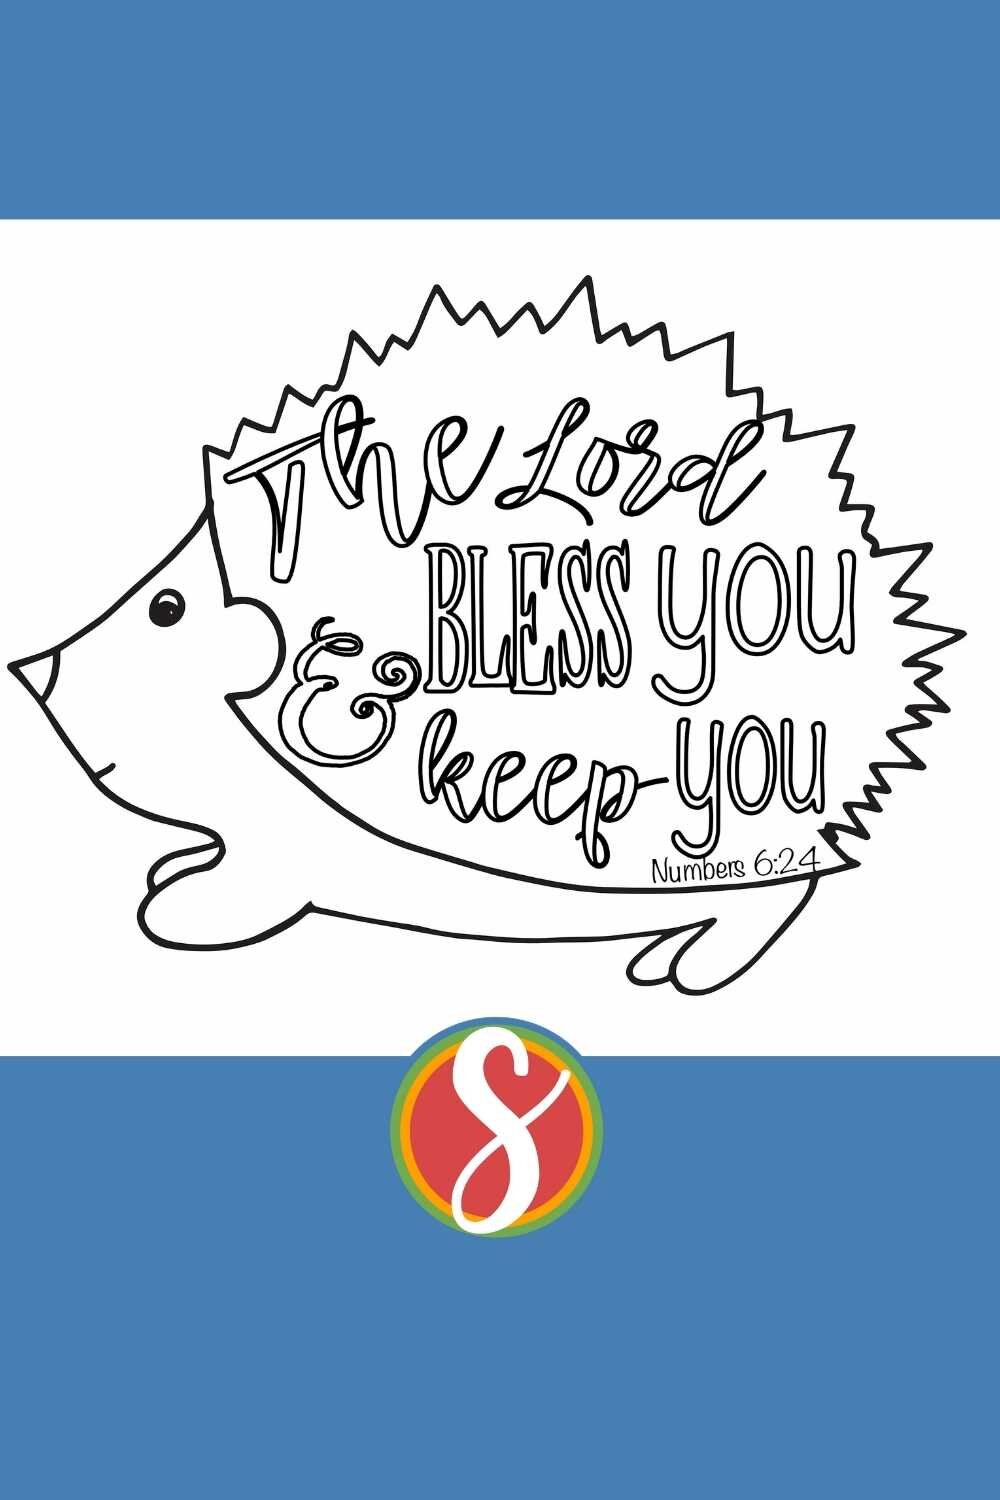 Lord bless you and keep you - this free scripture coloring sheet with a bit of scripture from Numbers is free to print and color from Stevie Doodles. Find more Christian coloring pages too - all free to print and color from Stevie Doodles